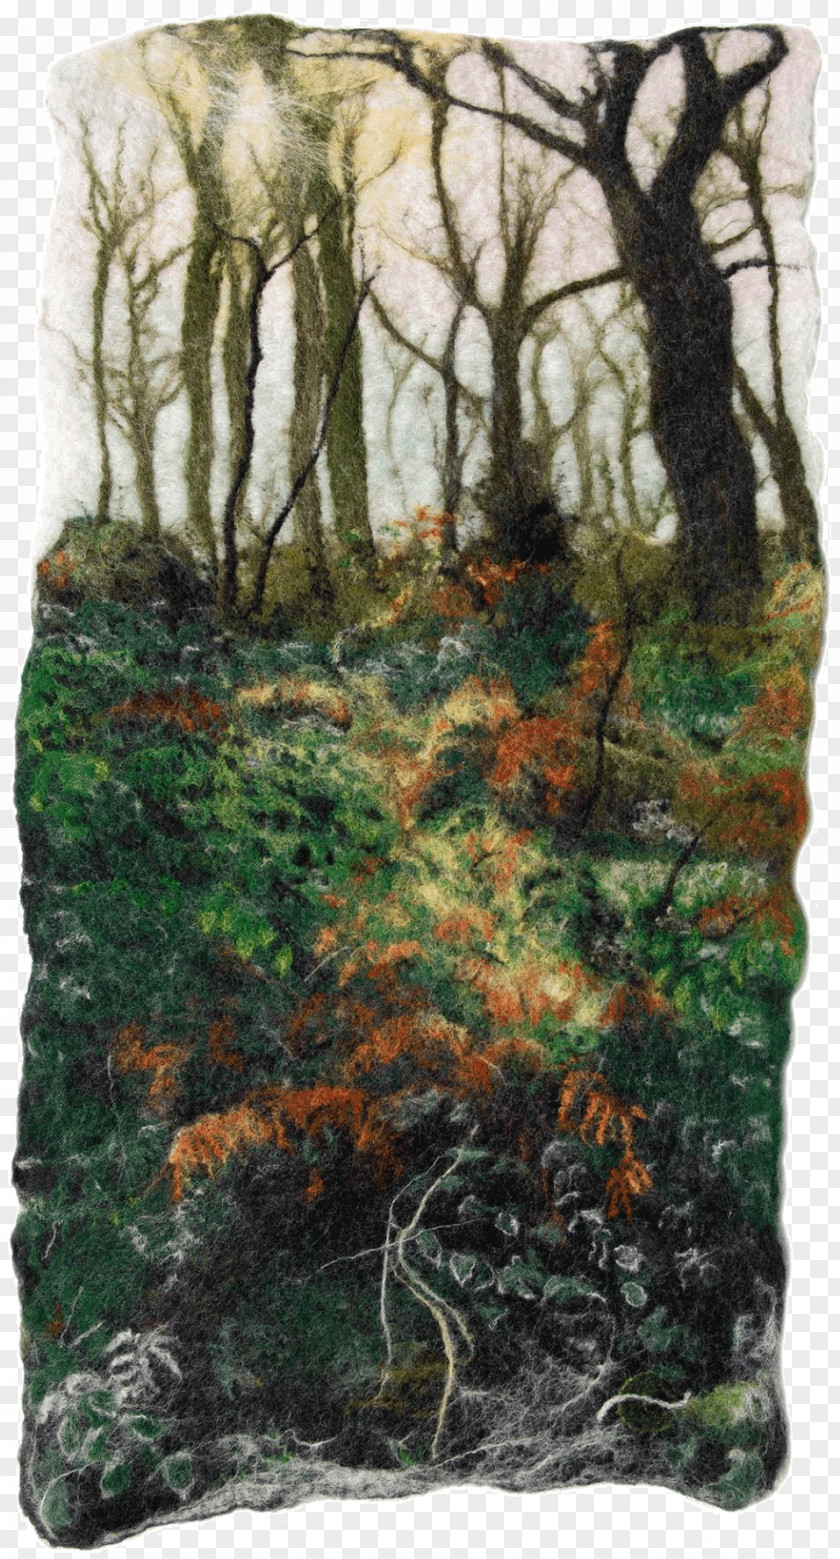 Woodland Royal Academy Of Arts Summer Exhibition Textile Madame Tricot: Delicatessen Felt PNG